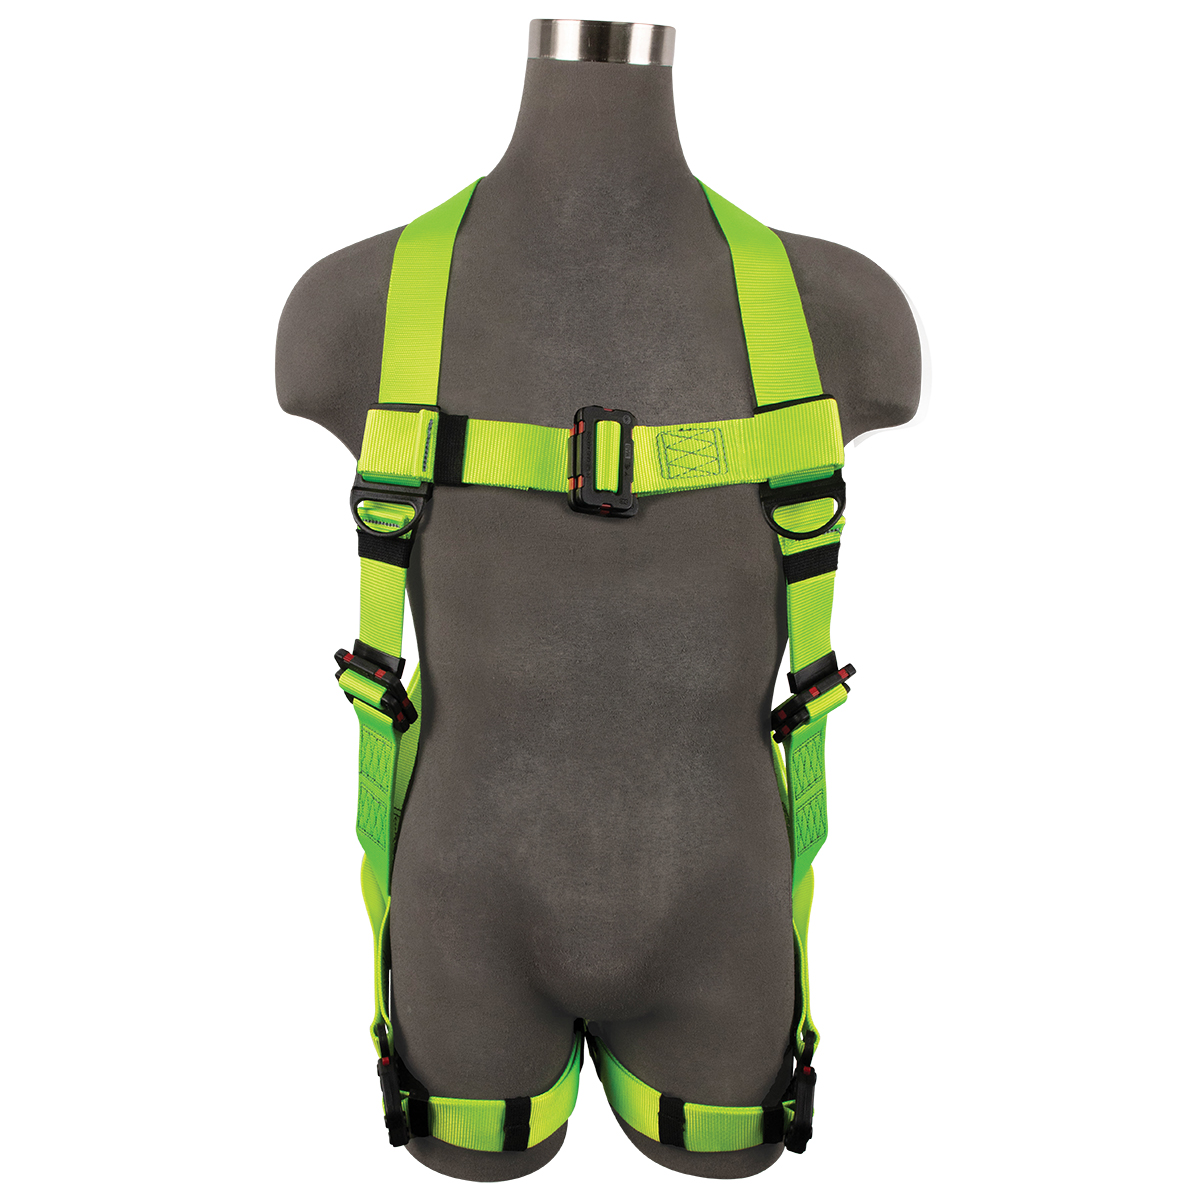 SAFEWAZE PRO+ Arc Flash Dielectric Harness with Pass through Dielectric on Chest and Quick-Connect Legs: 2XL